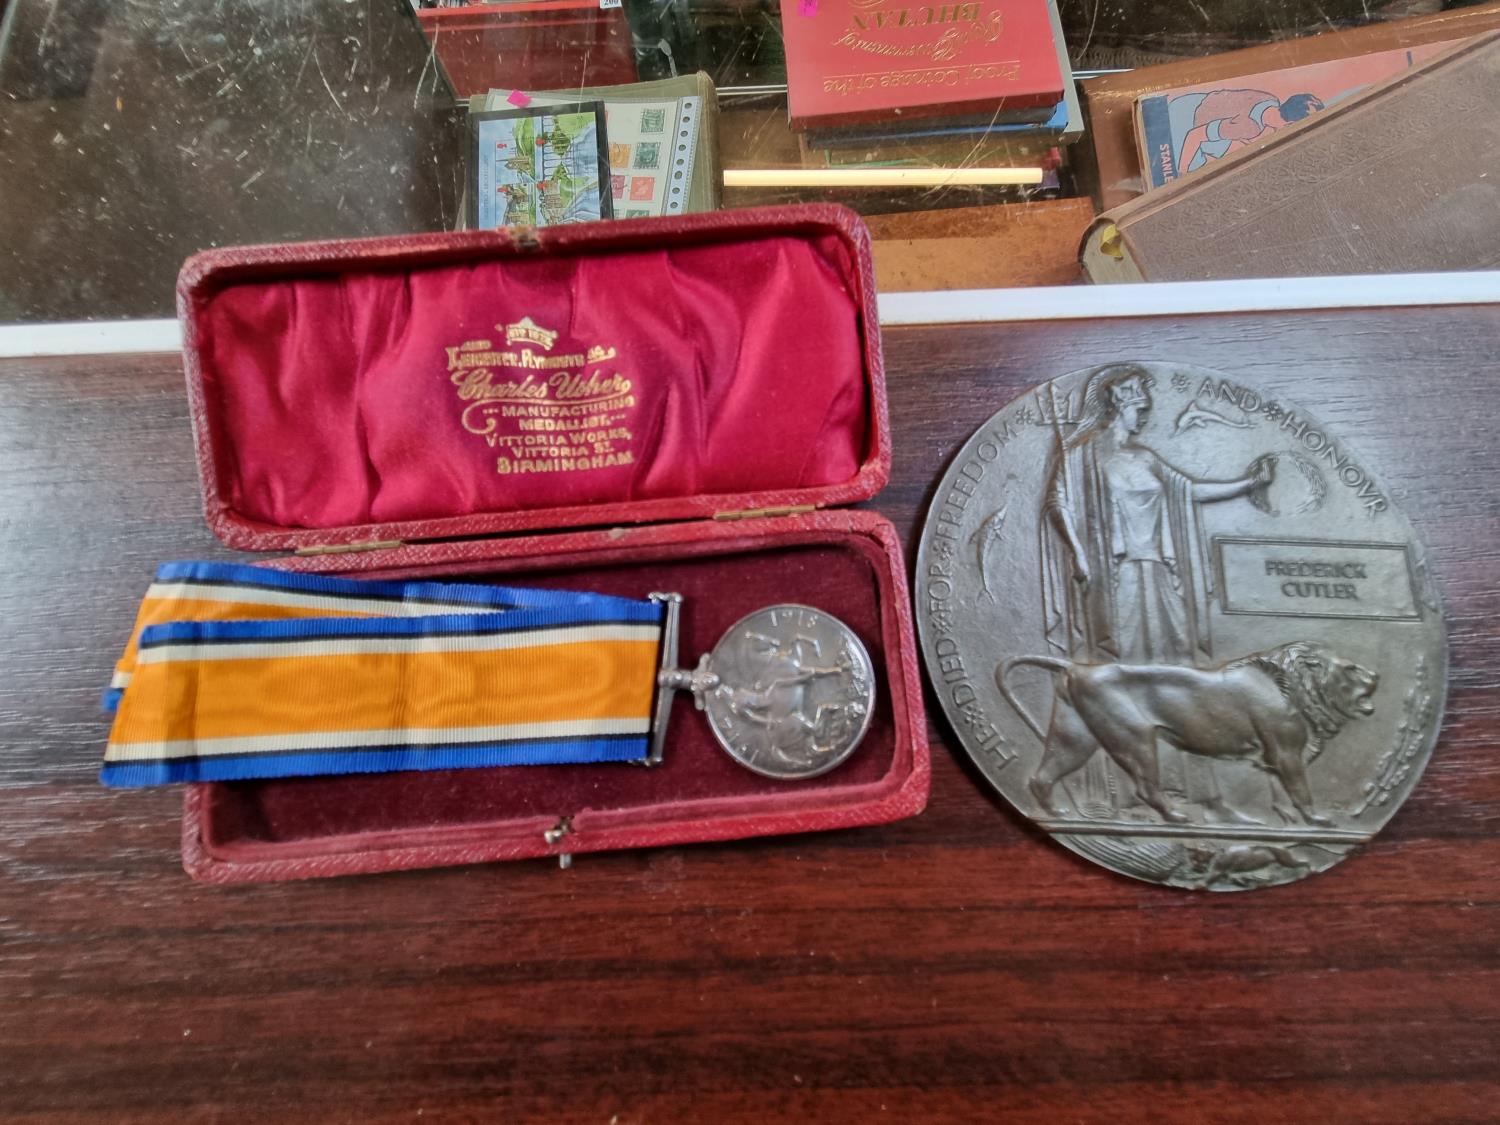 10718 Private Frederick Cutler 1914 - 18 Medal with Death Plaque